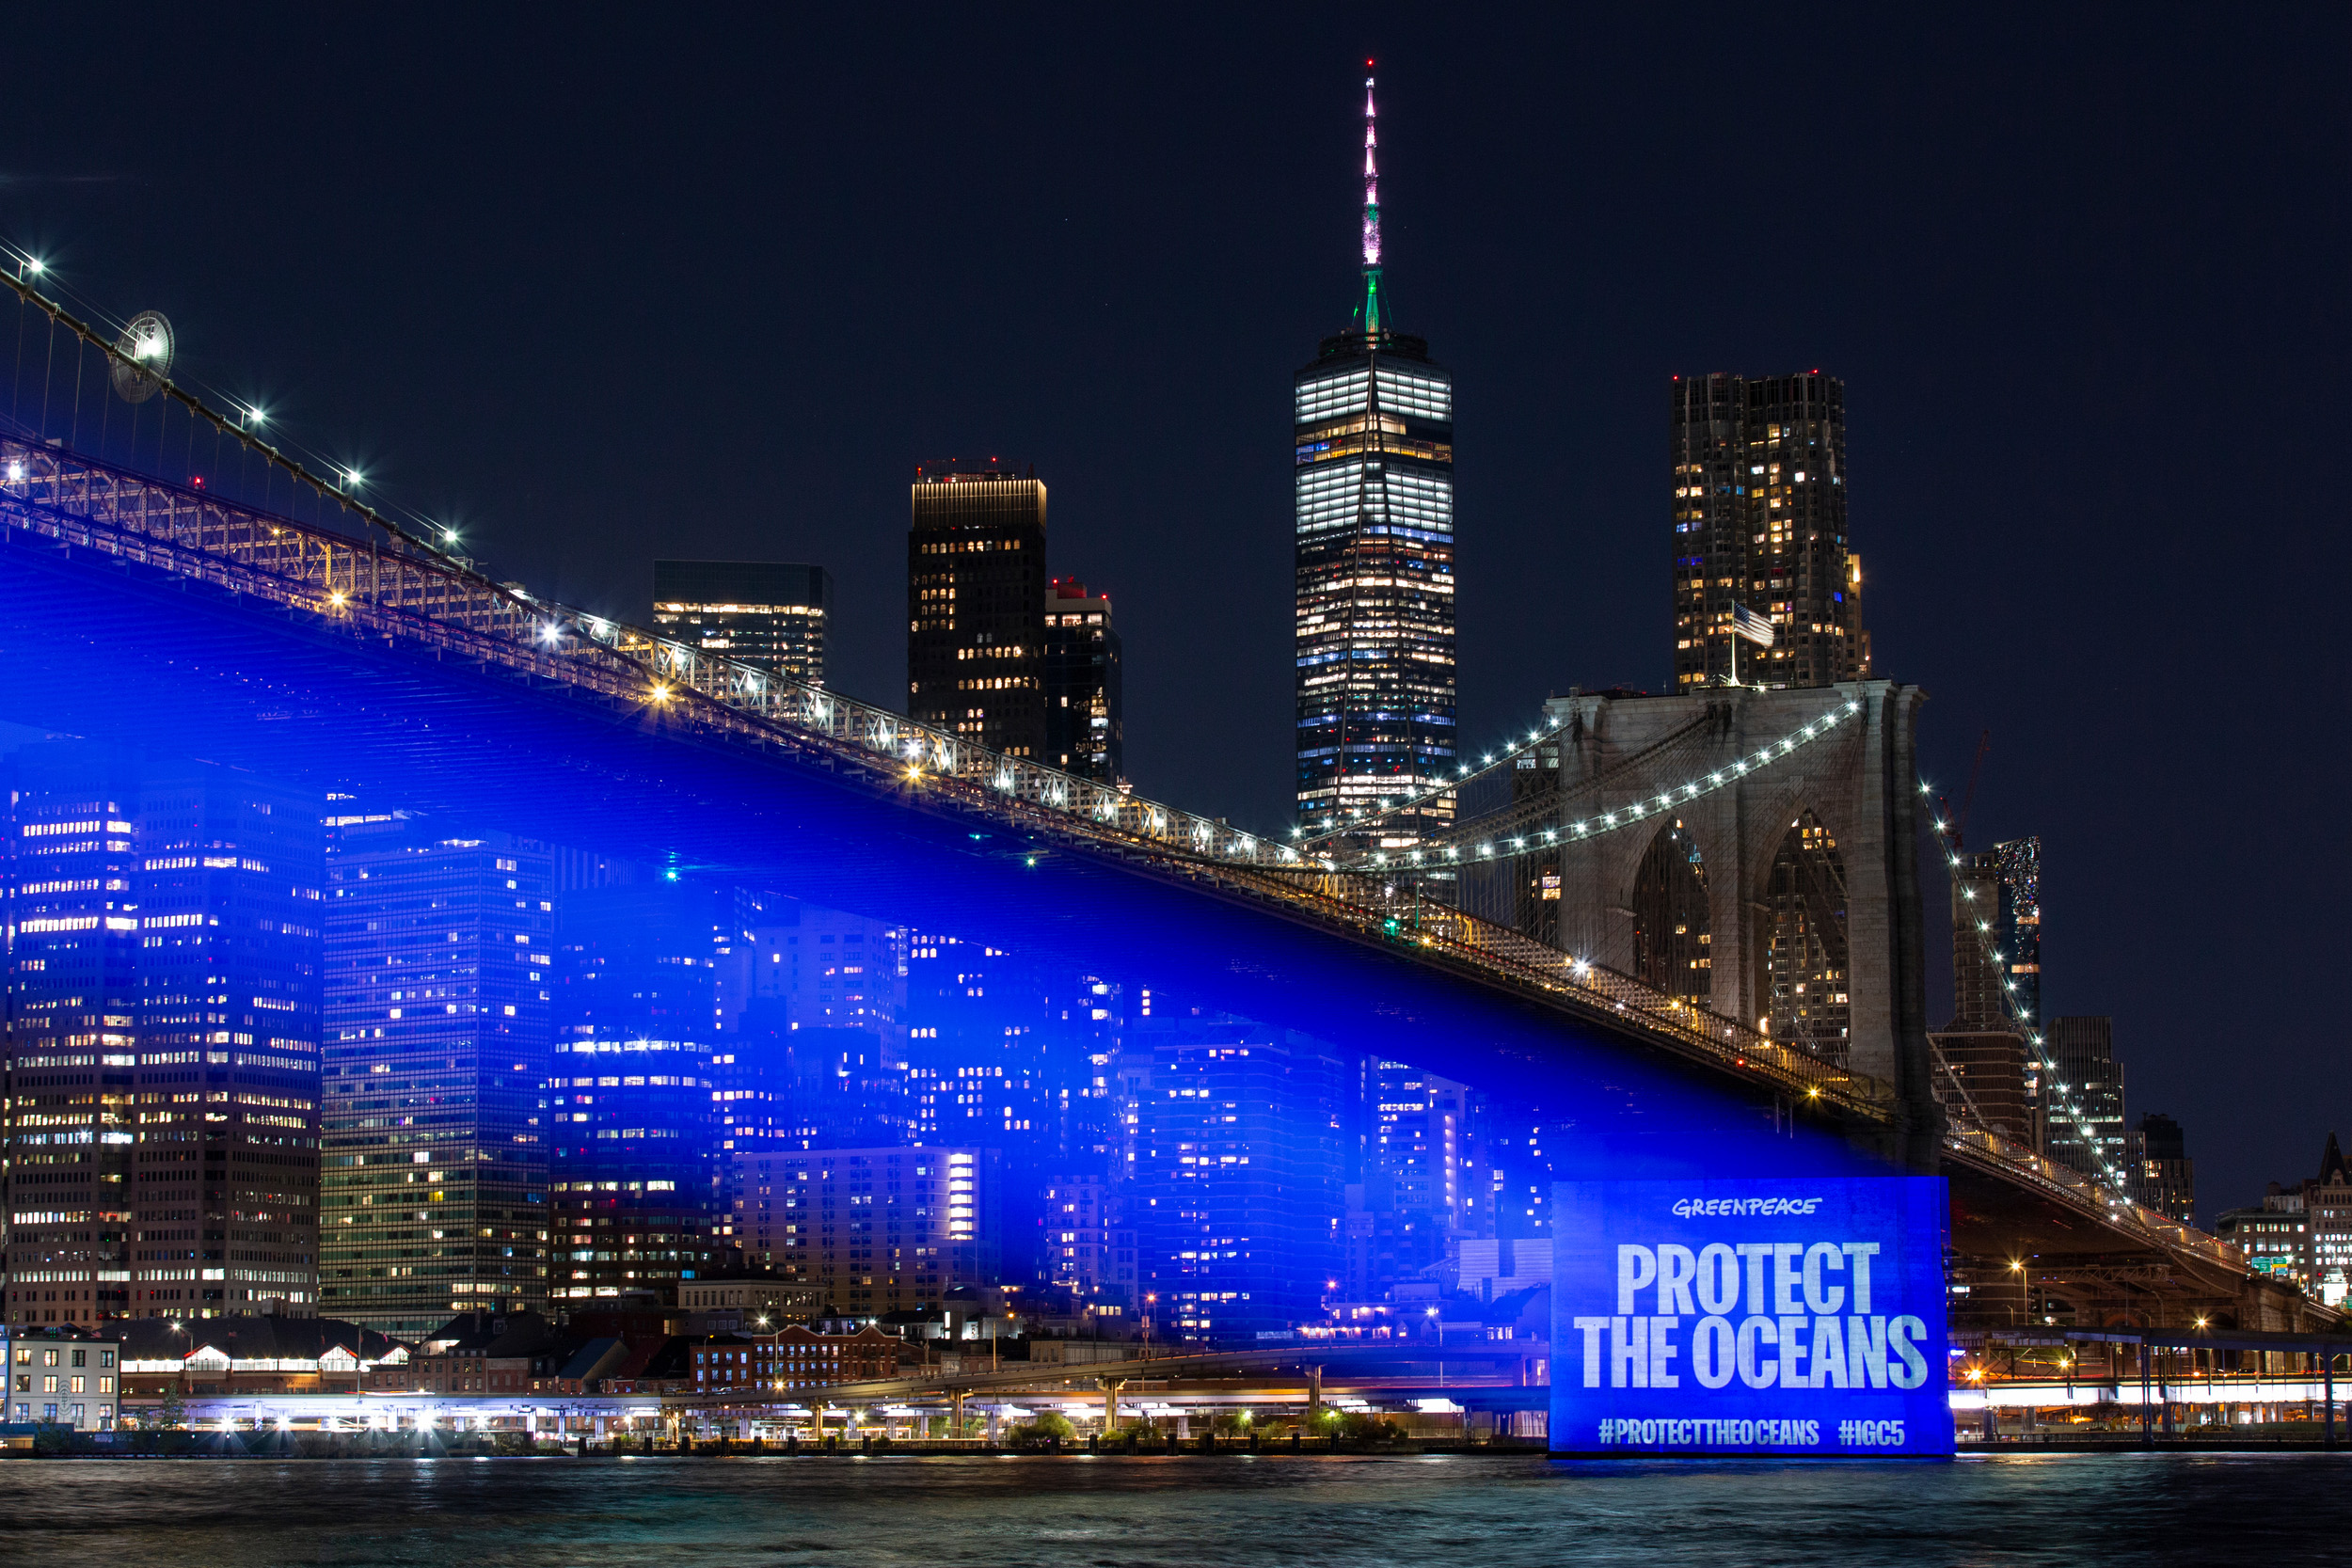 Golden lights glitter on a city bridge at night as a bright blue projection beams underneath. The projected text reads “Protect the oceans”